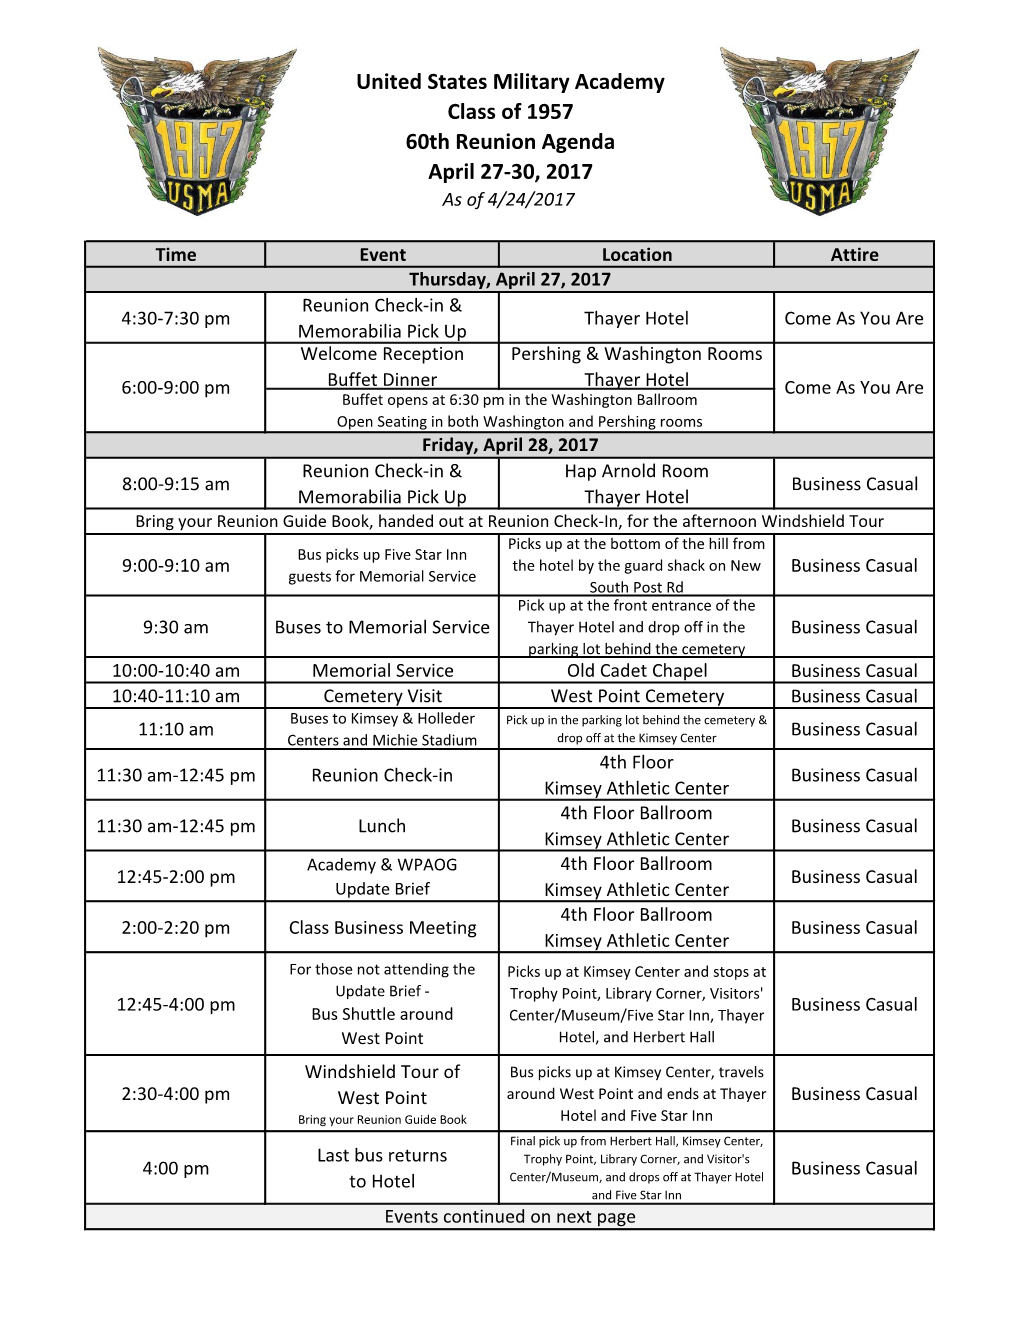 United States Military Academy Class of 1957 60Th Reunion Agenda April 27-30, 2017 As of 4/24/2017